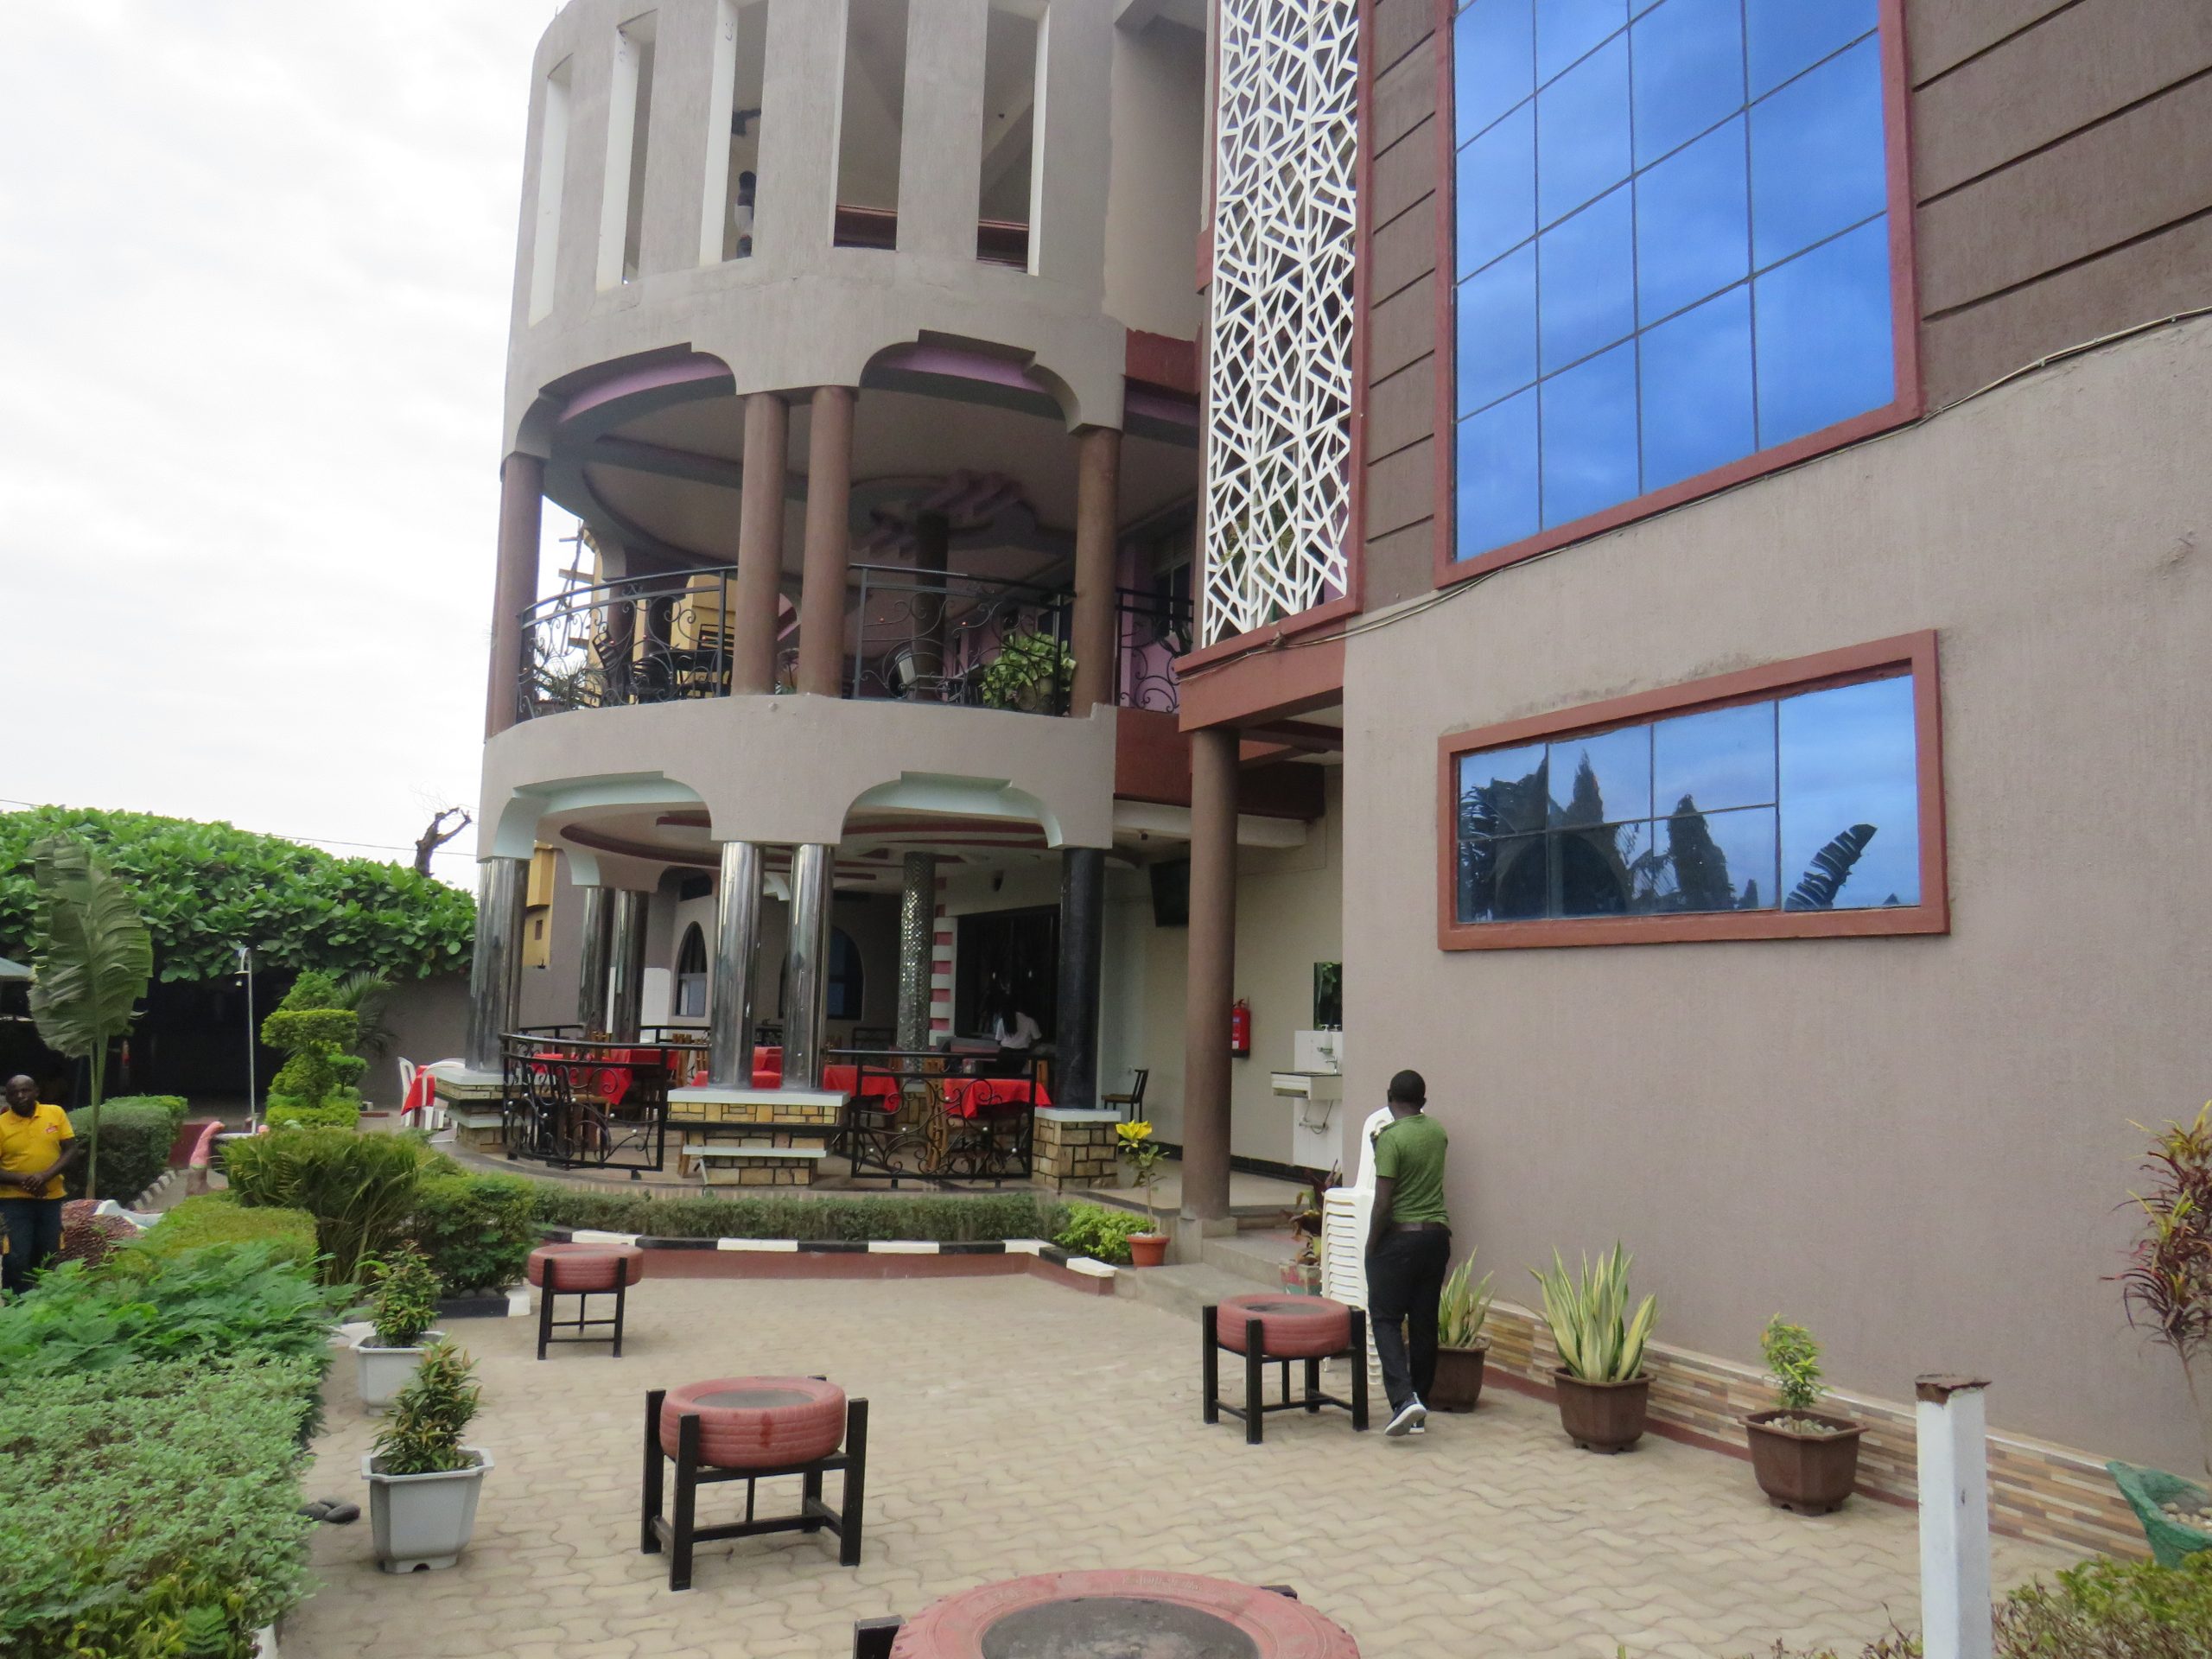 Kamwe Kamwe hotel and Spar Location: GPS;0.17761, 30.08111, Mbogoyabo-Kisanga road Telephone Contact: +256393254173/ +256200908994 Email: info@kamwekamwehotel.com/ kamwekamwehotelspa@gmail.com Website: www.kamwekamwehotel.com Facilities •	Accommodation •	Restaurant and Bar  •	Conference facilities •	Internet services